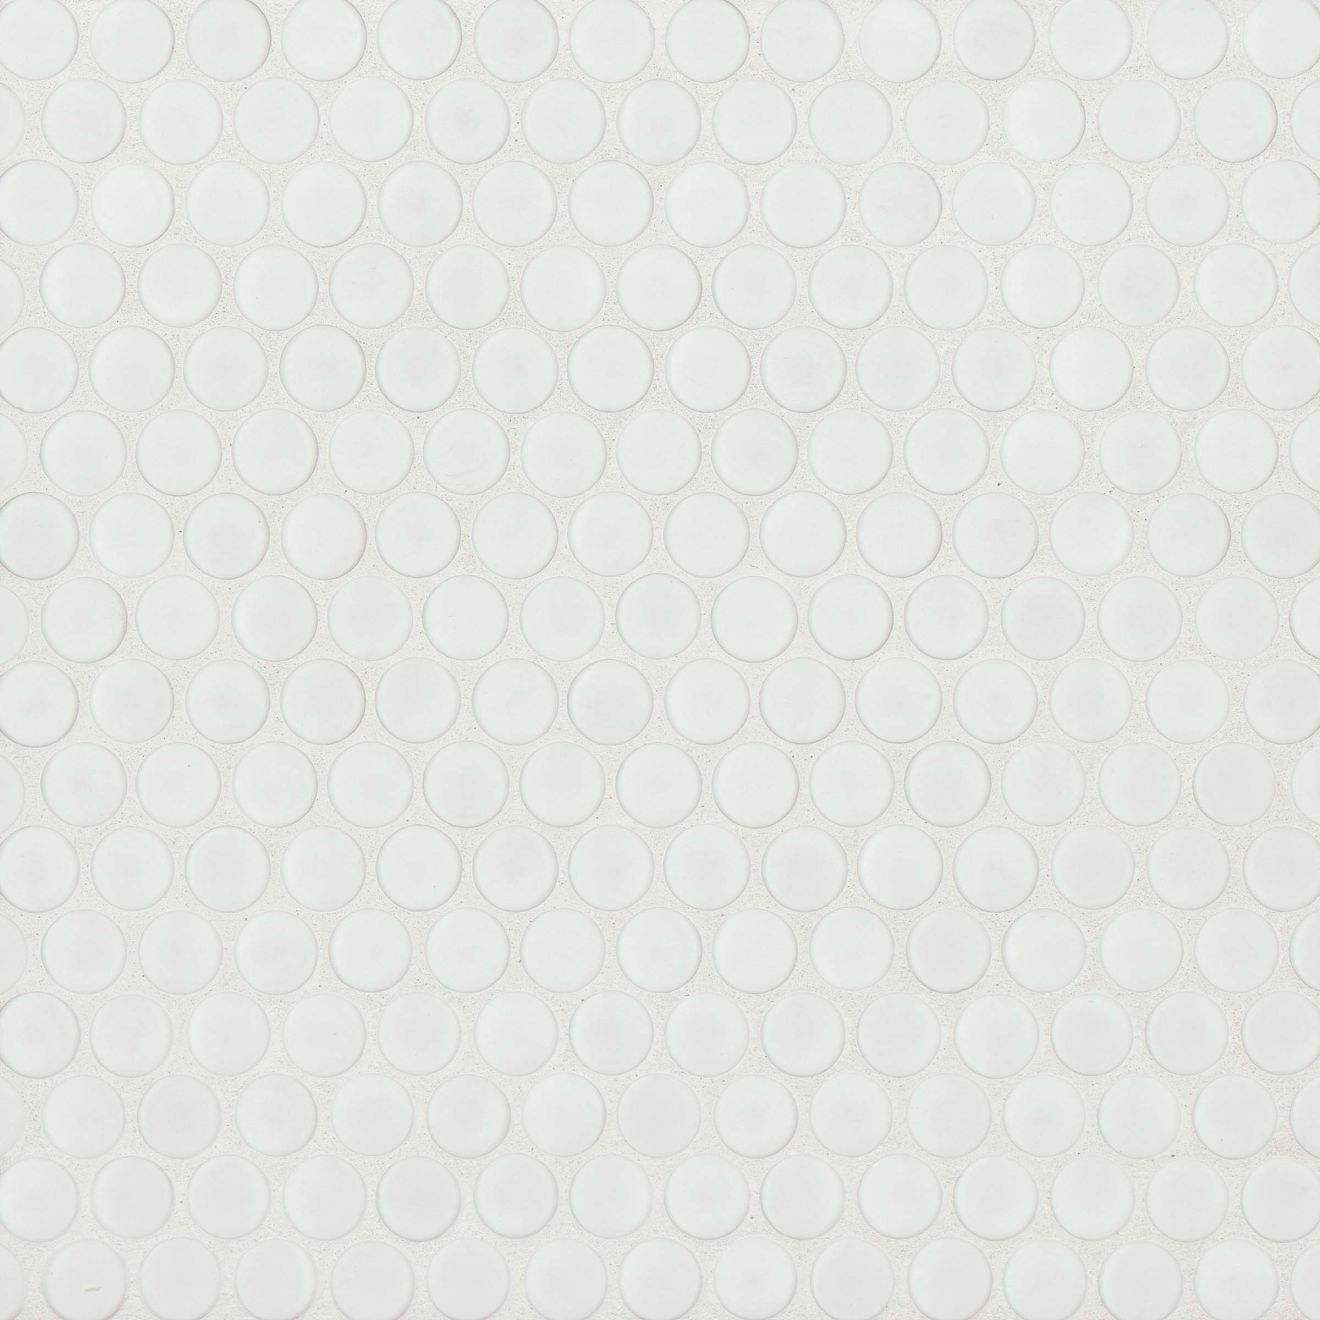 Matte white penny shaped mosaic tile on a beige background.